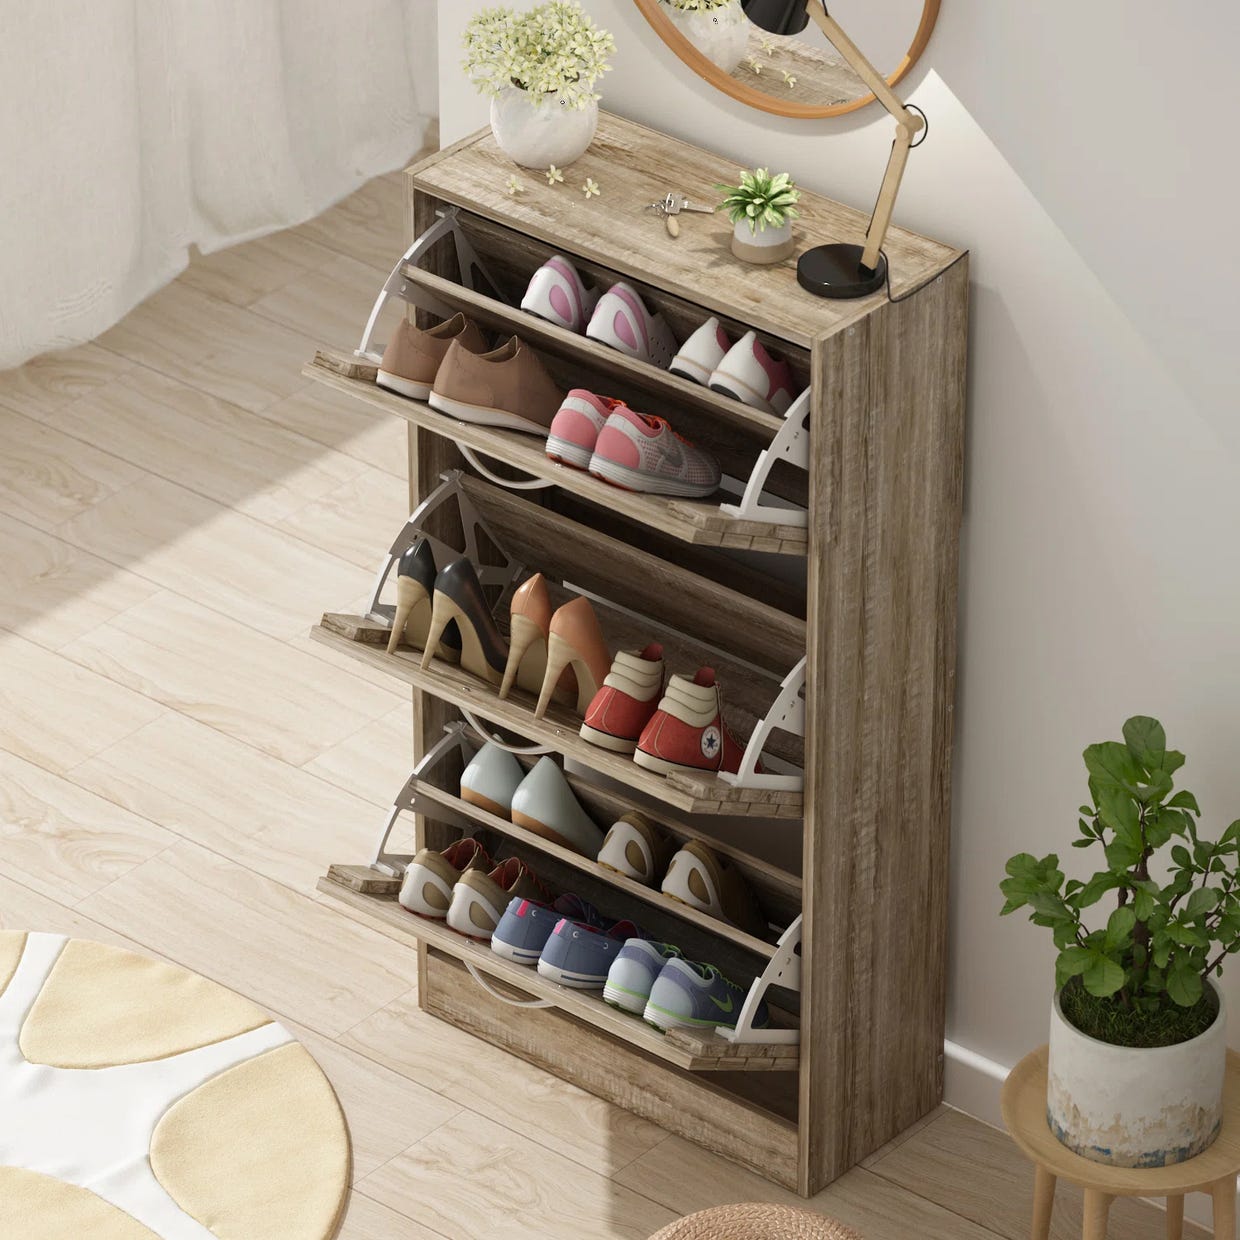 Wooden shoe storage cabinet with multiple compartments and pull-down drawers, holding various footwear pairs.